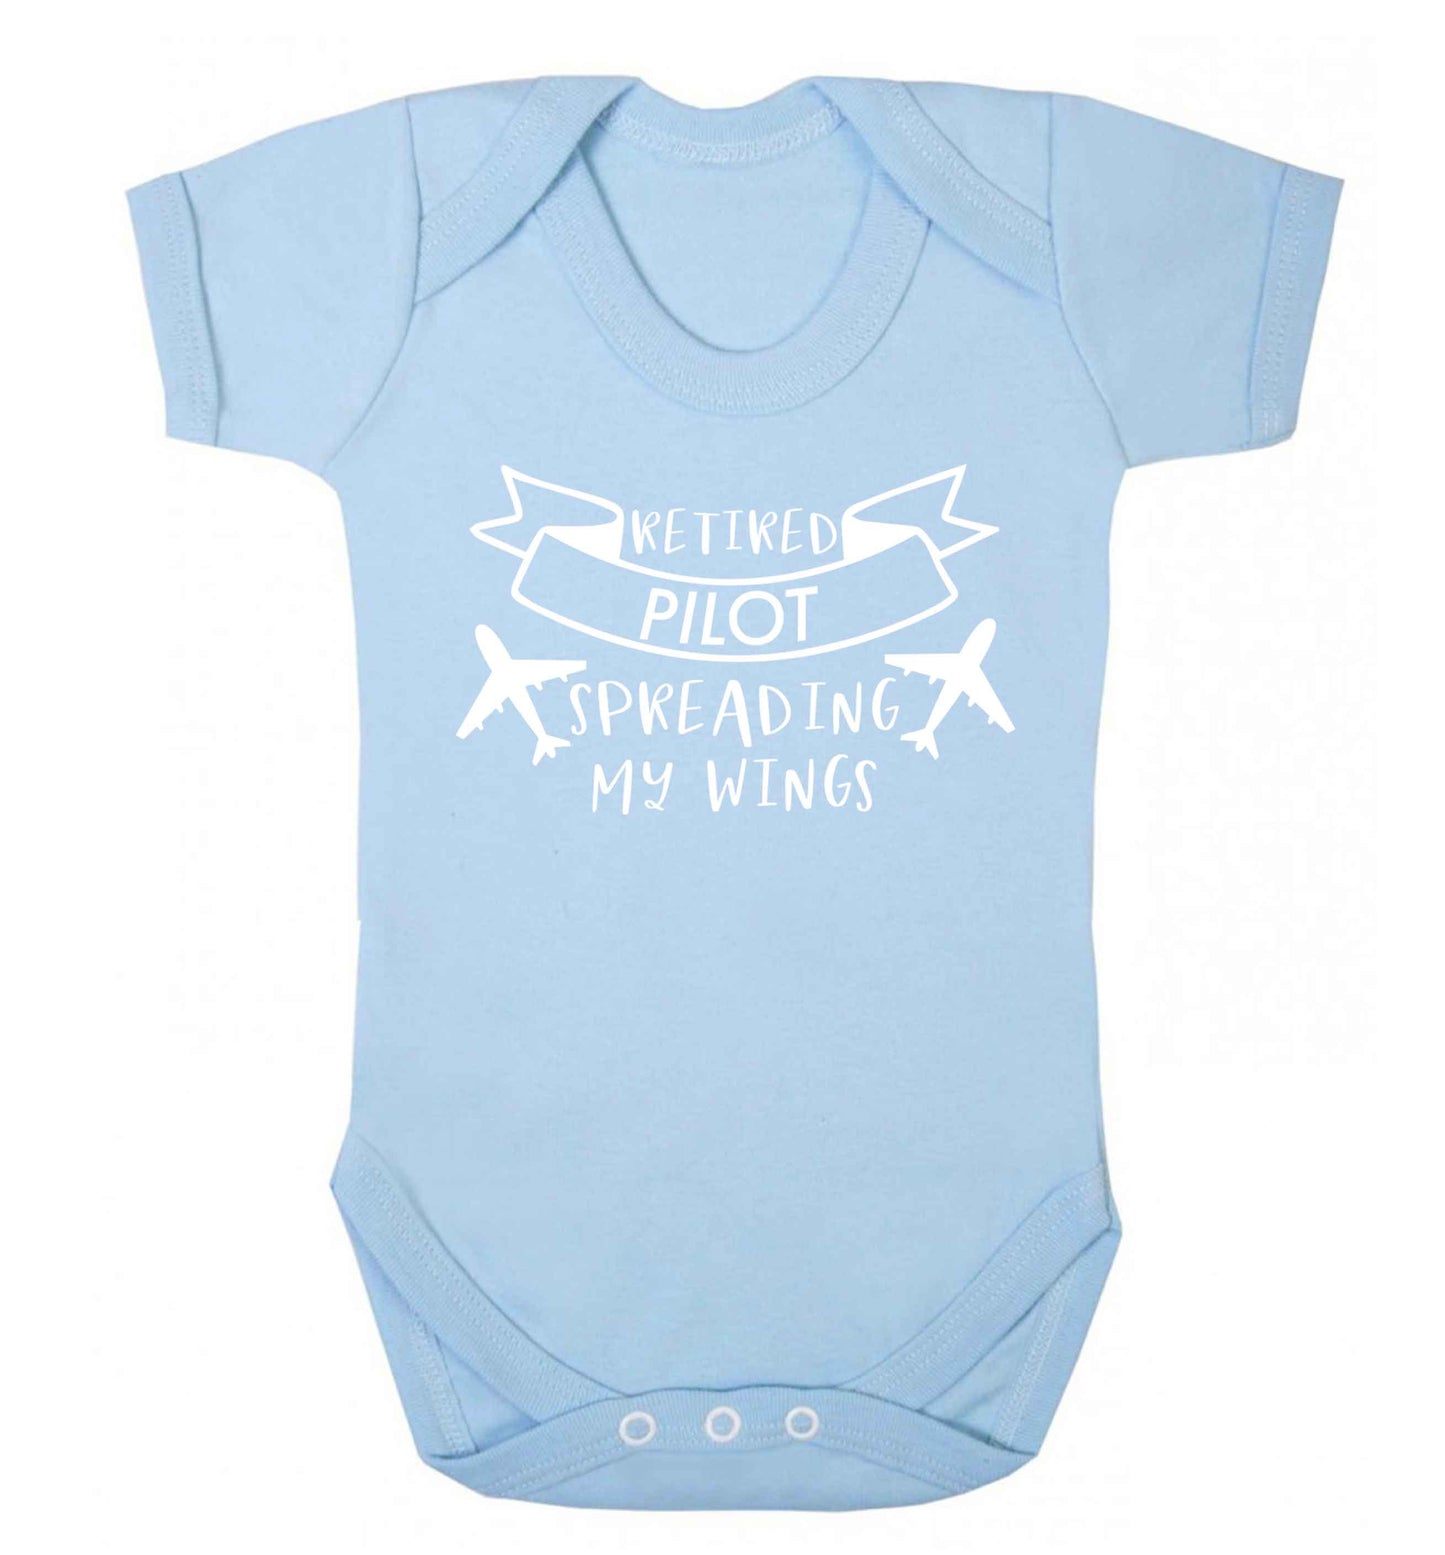 Retired pilot spreading my wings Baby Vest pale blue 18-24 months